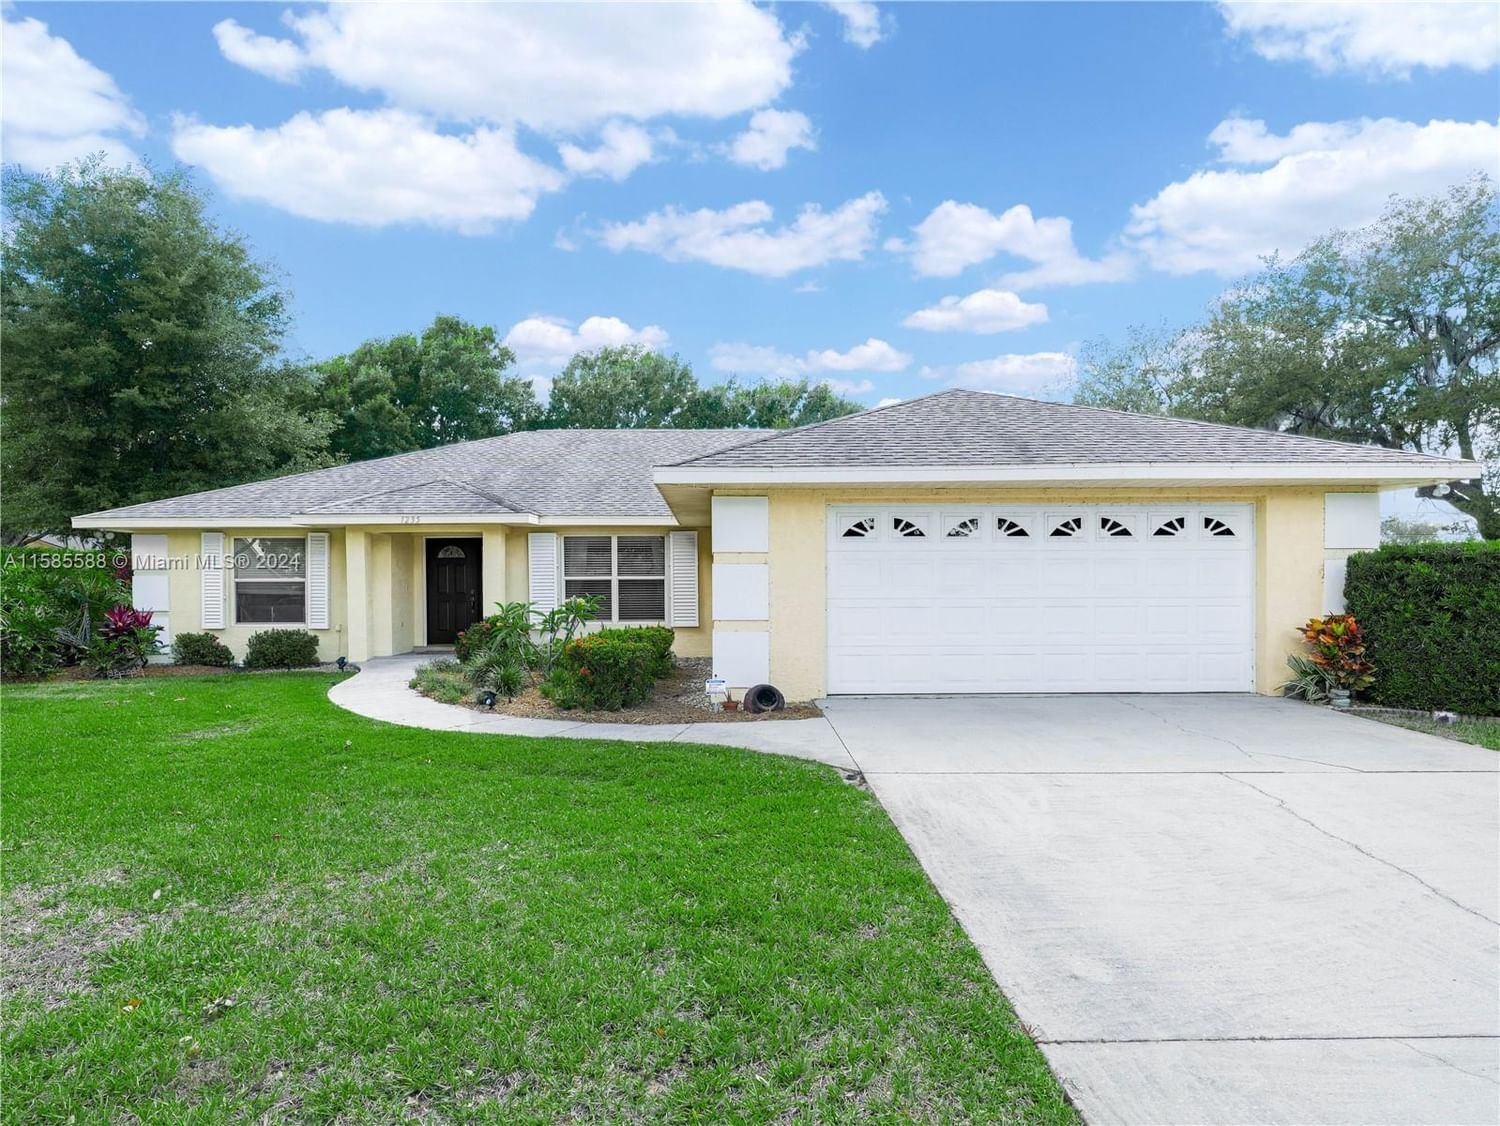 Real estate property located at 1235 Driscoll Dr., Highlands County, Lake Blue Estates, Lake Placid, FL